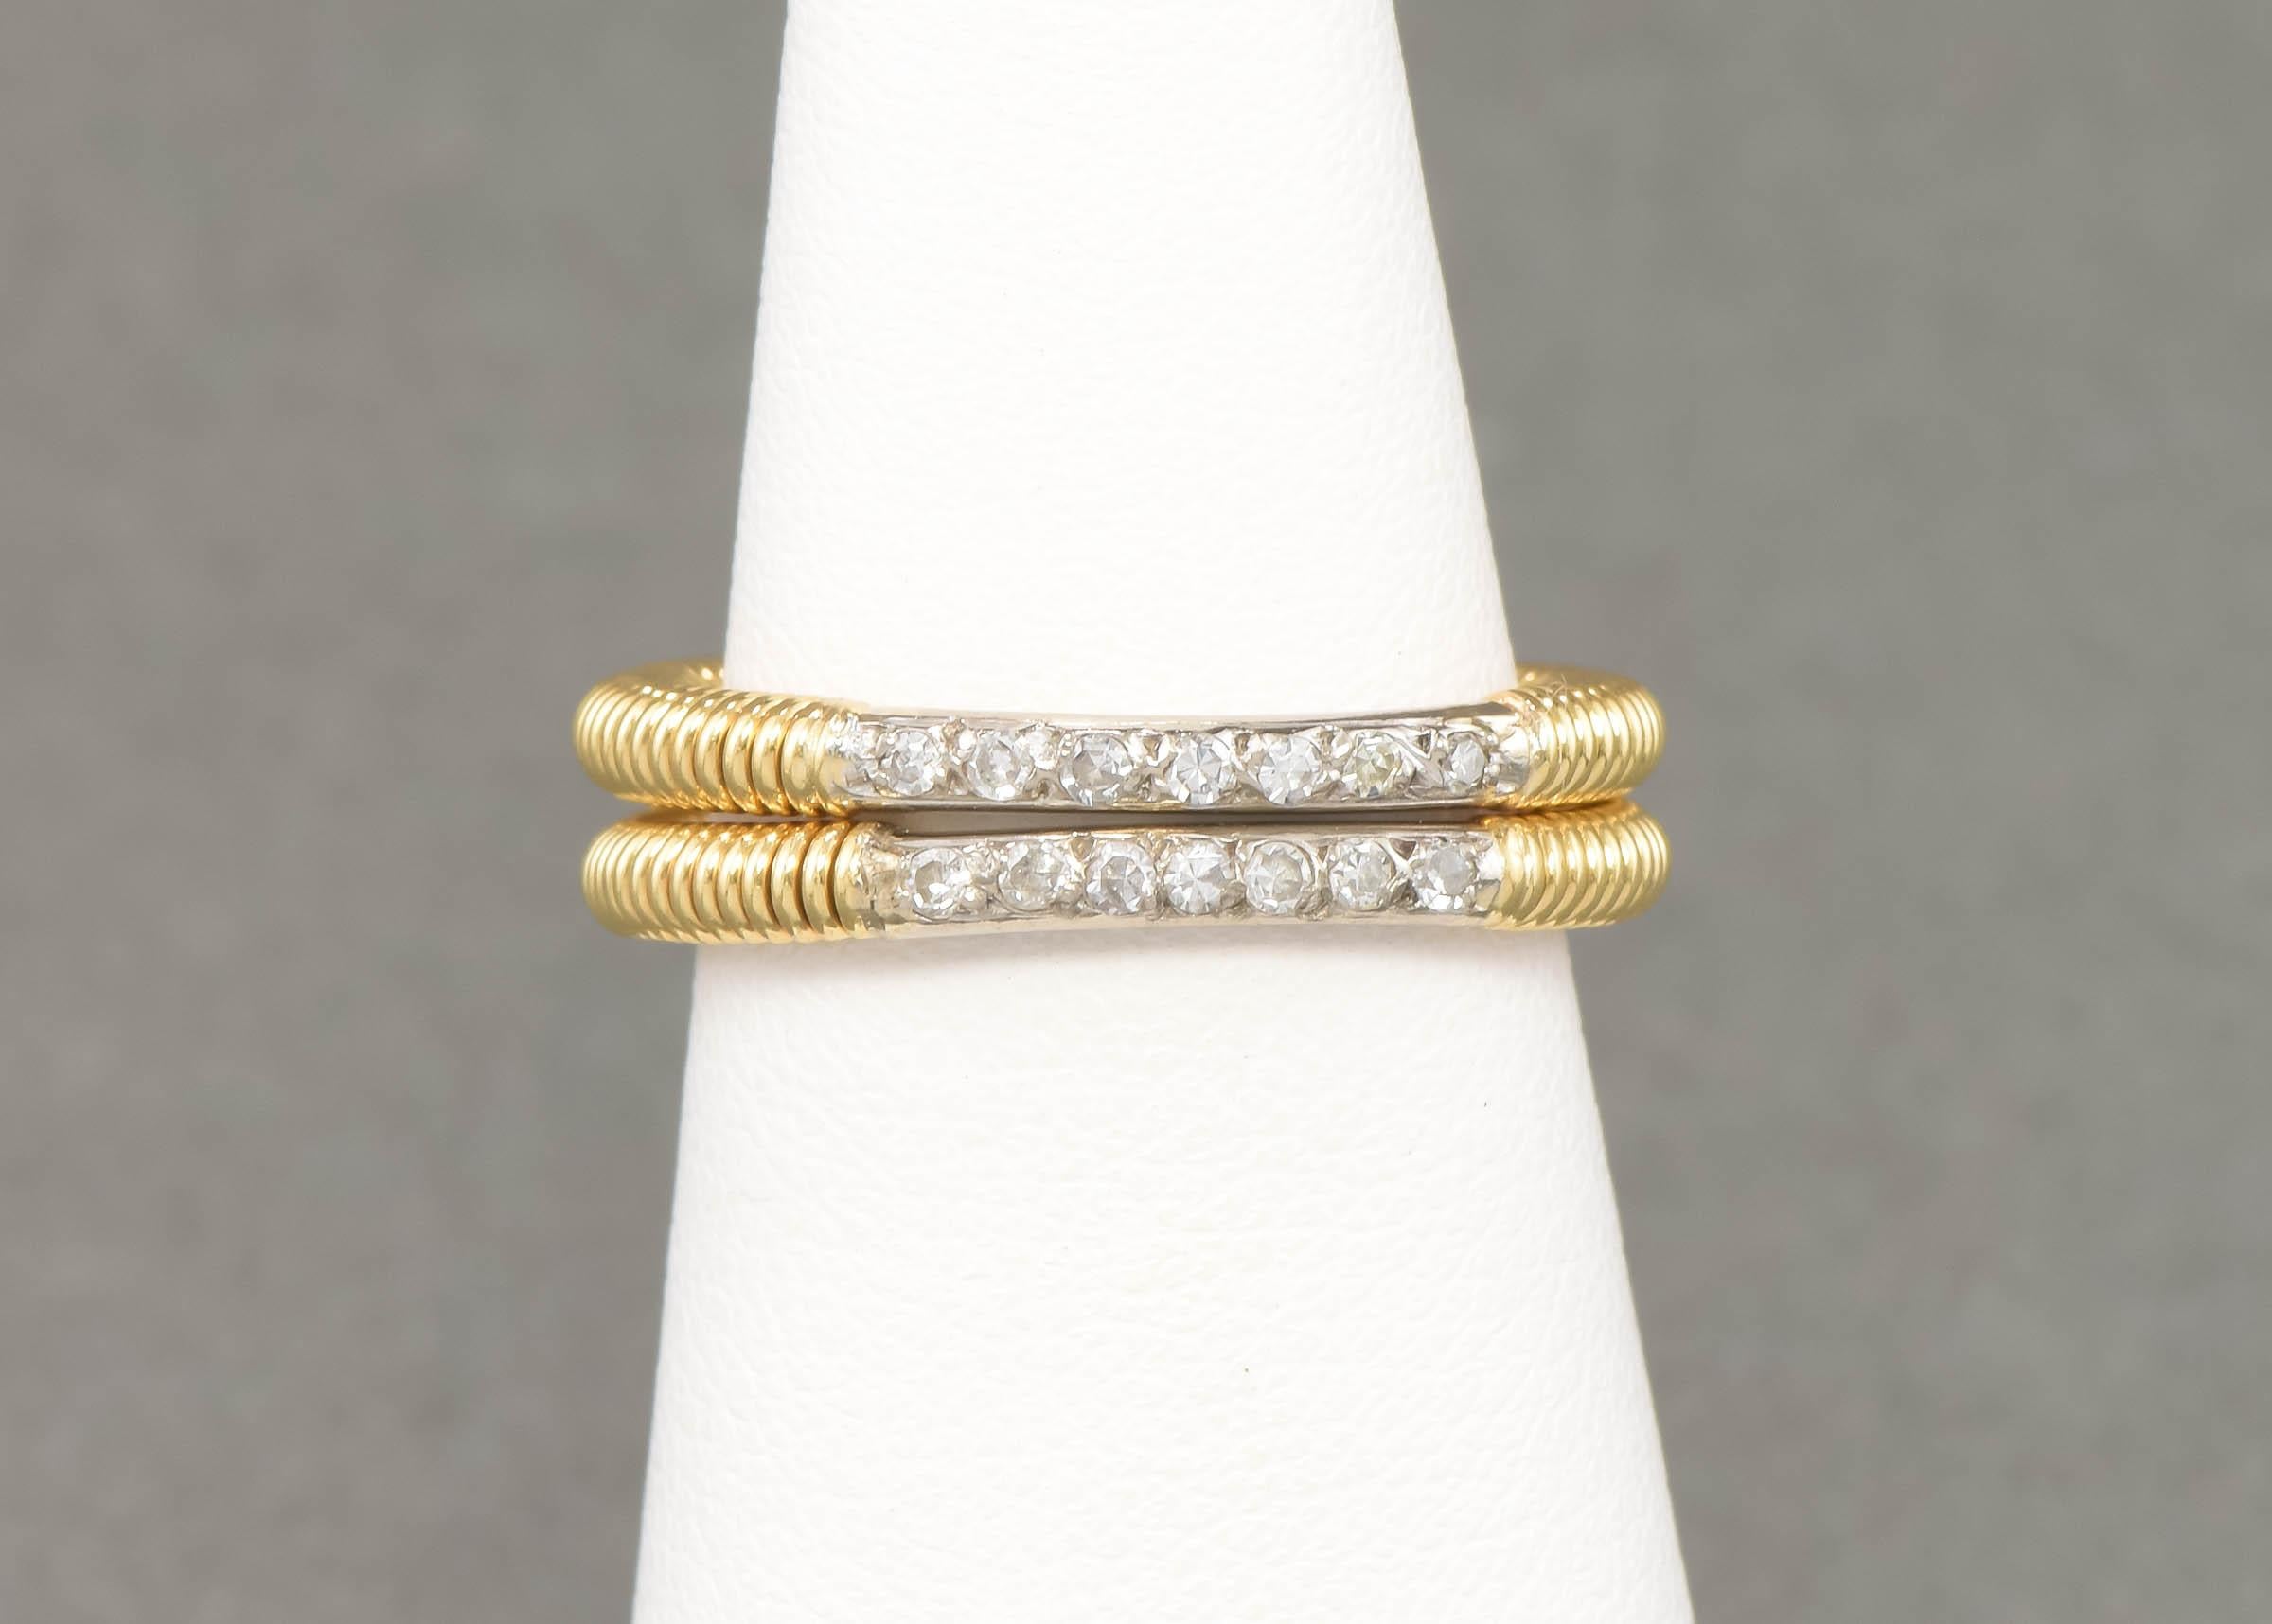 While not flexible like a true tobogas style, this fun pair of matching 18K gold diamond bands certainly resemble the tubogas jewelry popularized in the 1930s and 1940s.  Great worn together or on their own, I think they look particularly good when